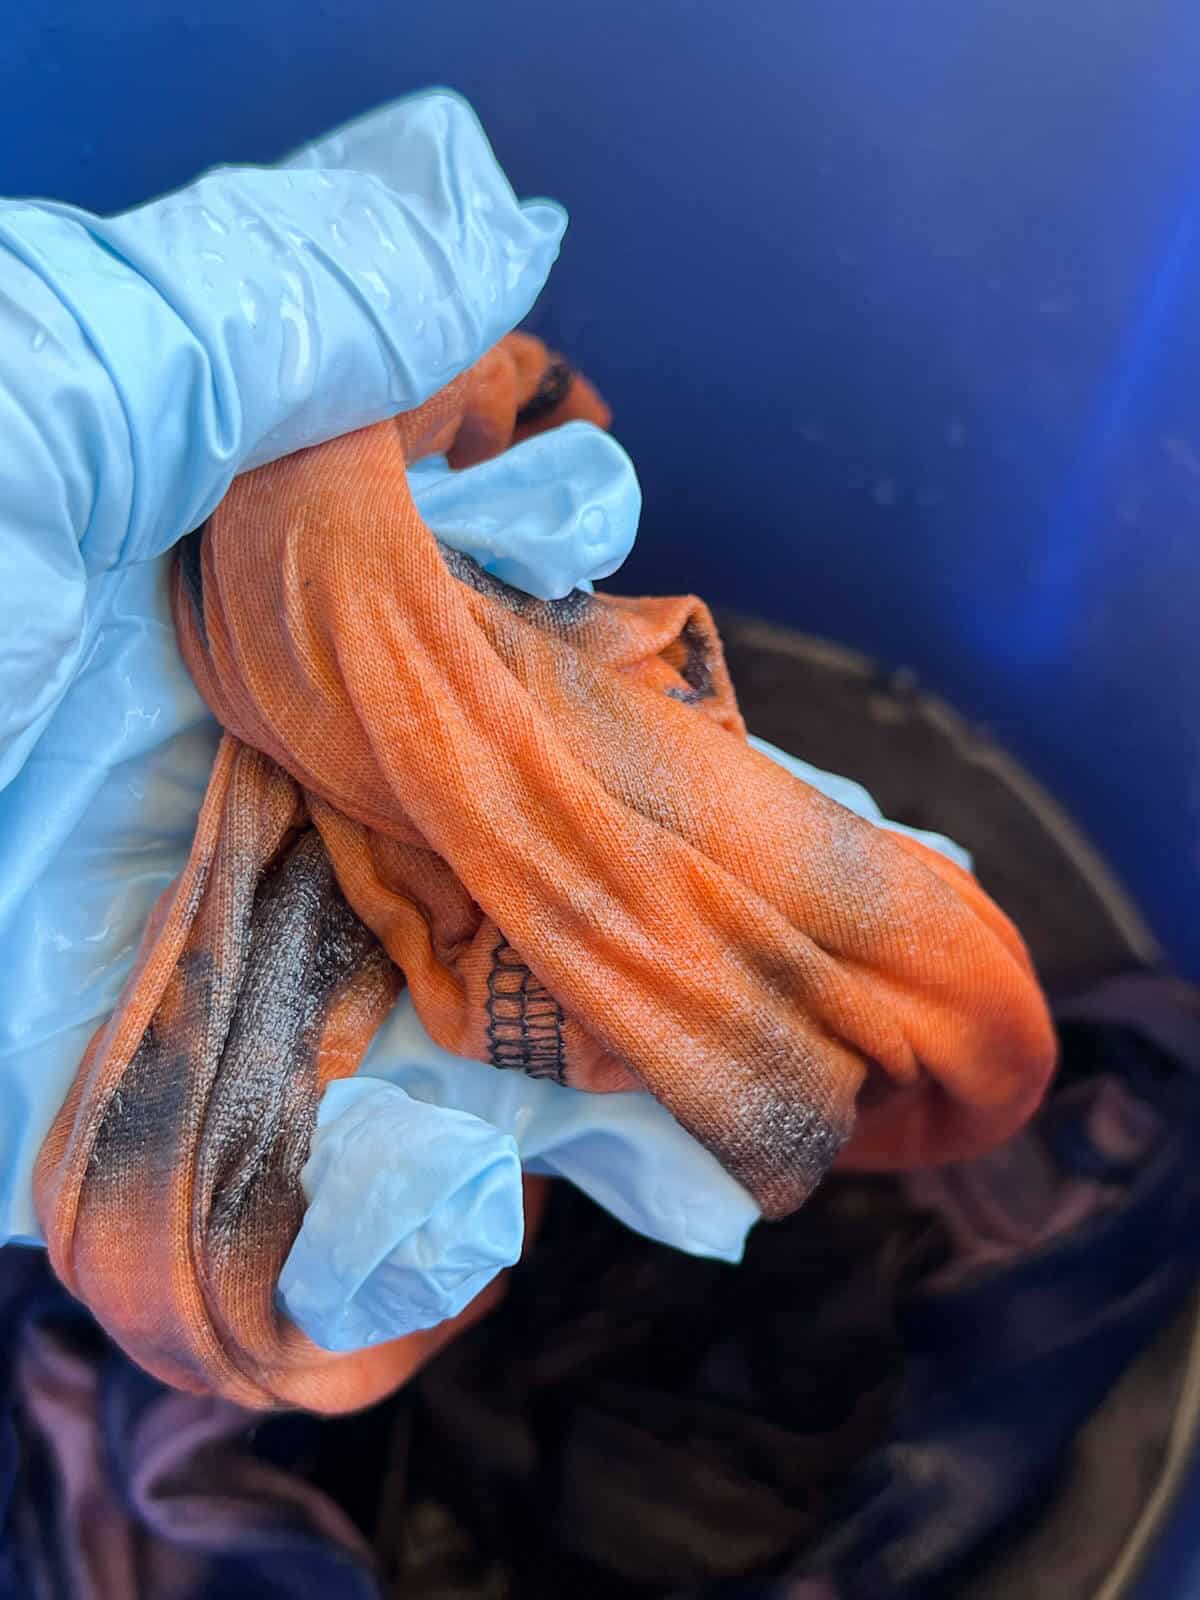 hand holding part of shirt being rinsed in water.